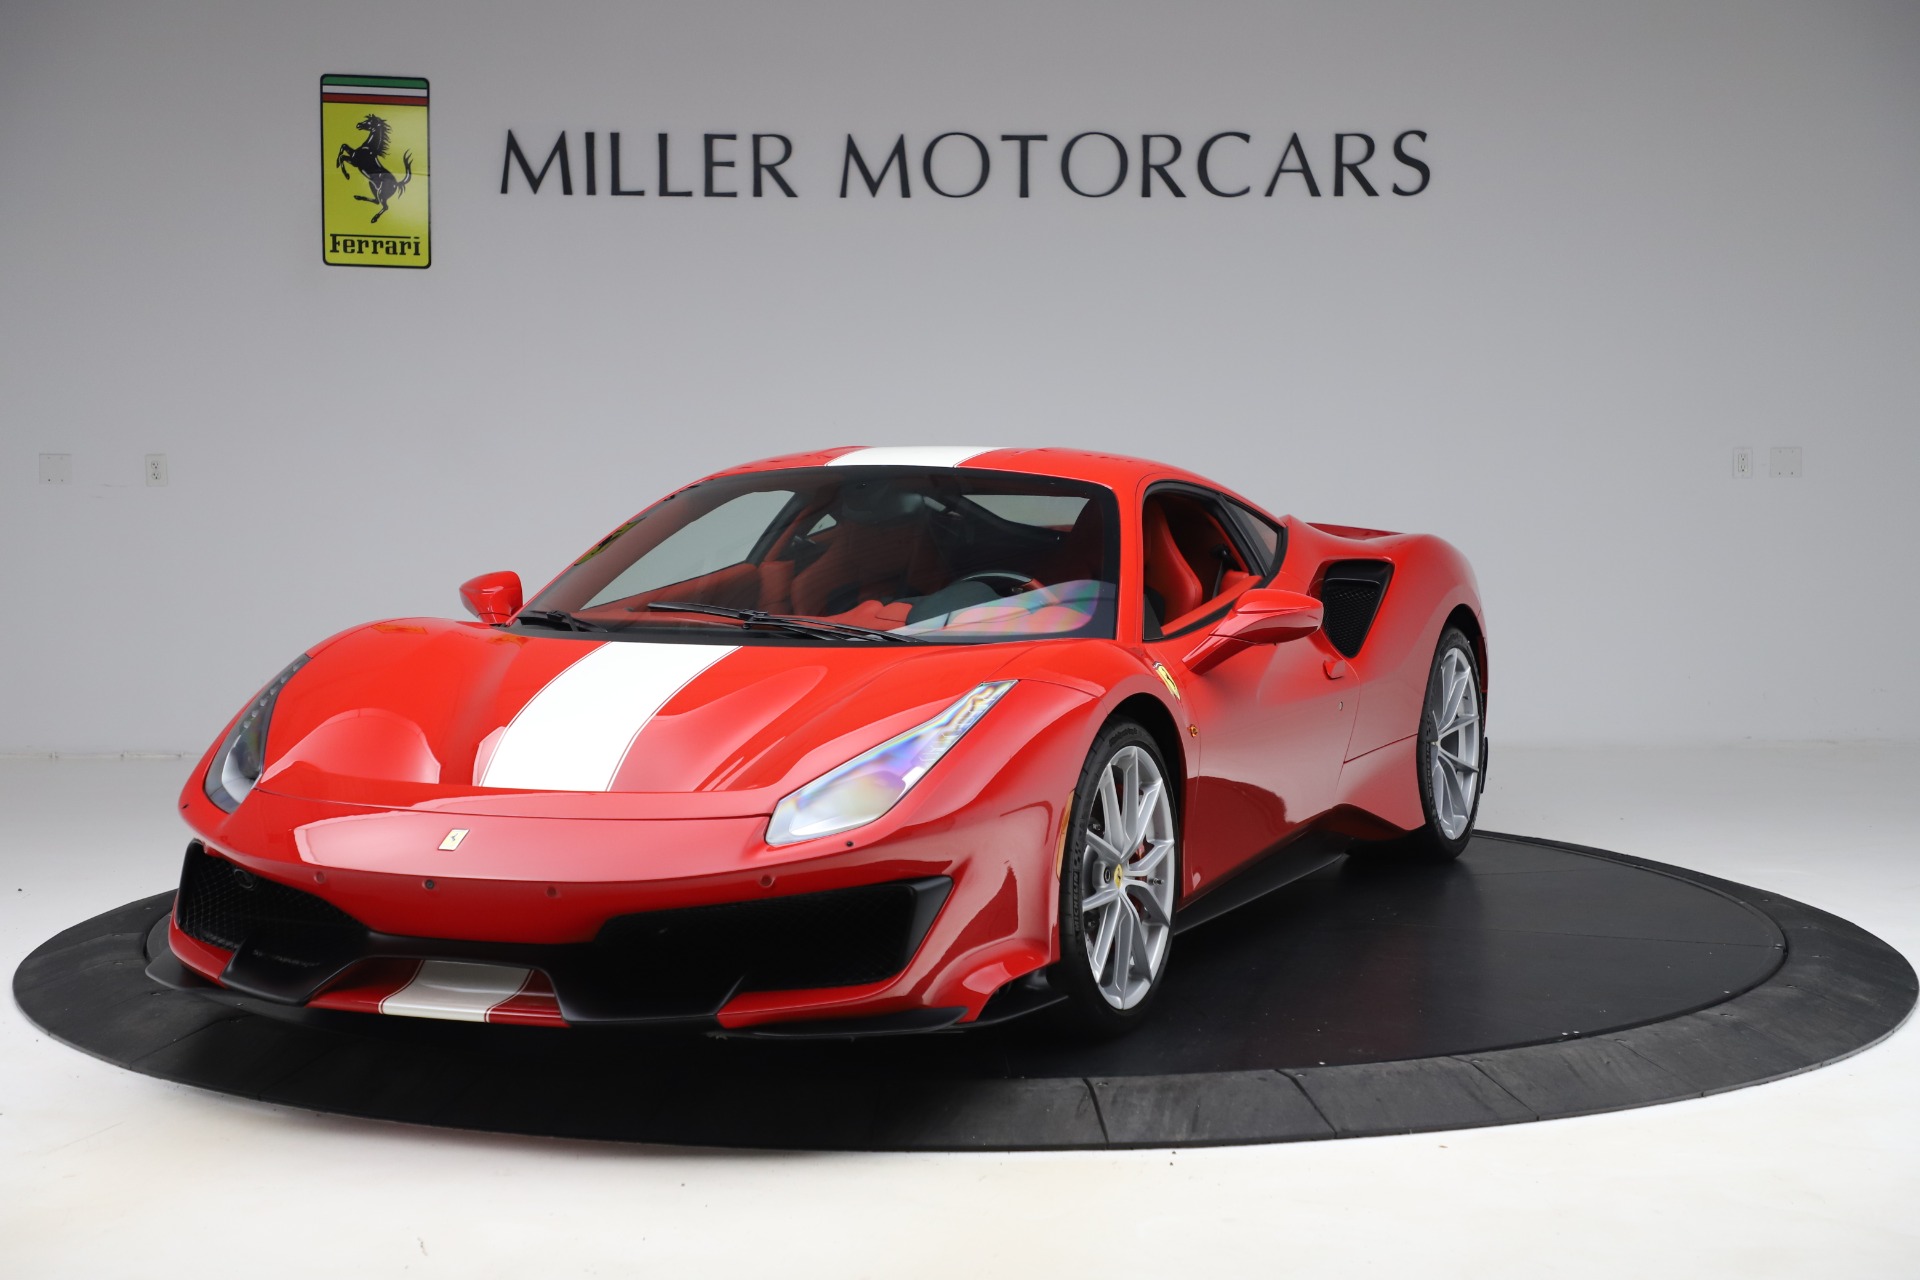 Used 2019 Ferrari 488 Pista for sale Sold at Bentley Greenwich in Greenwich CT 06830 1